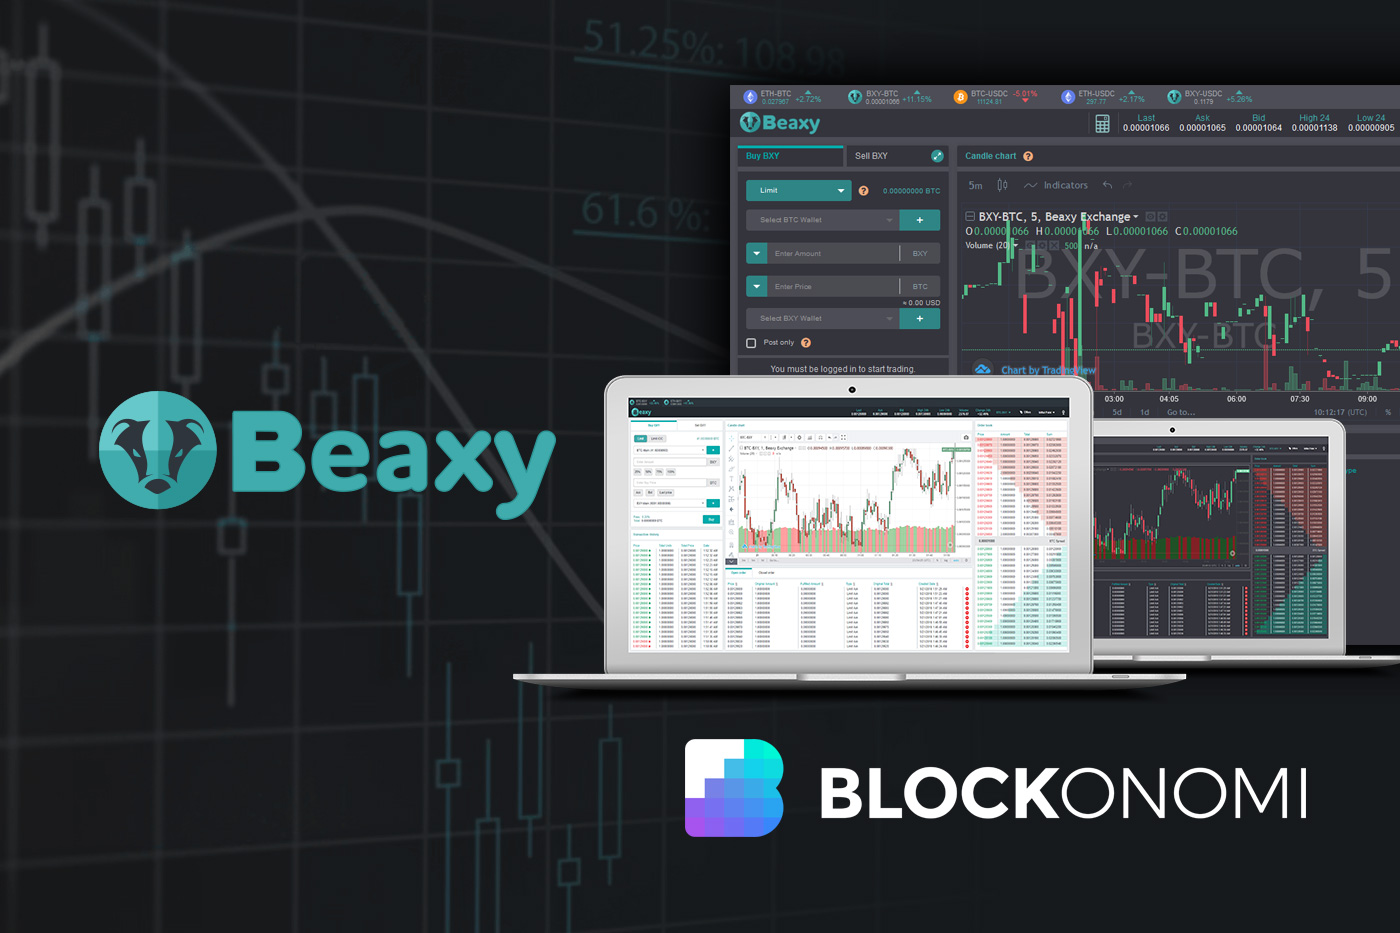 Beaxy trade volume and market listings | CoinMarketCap